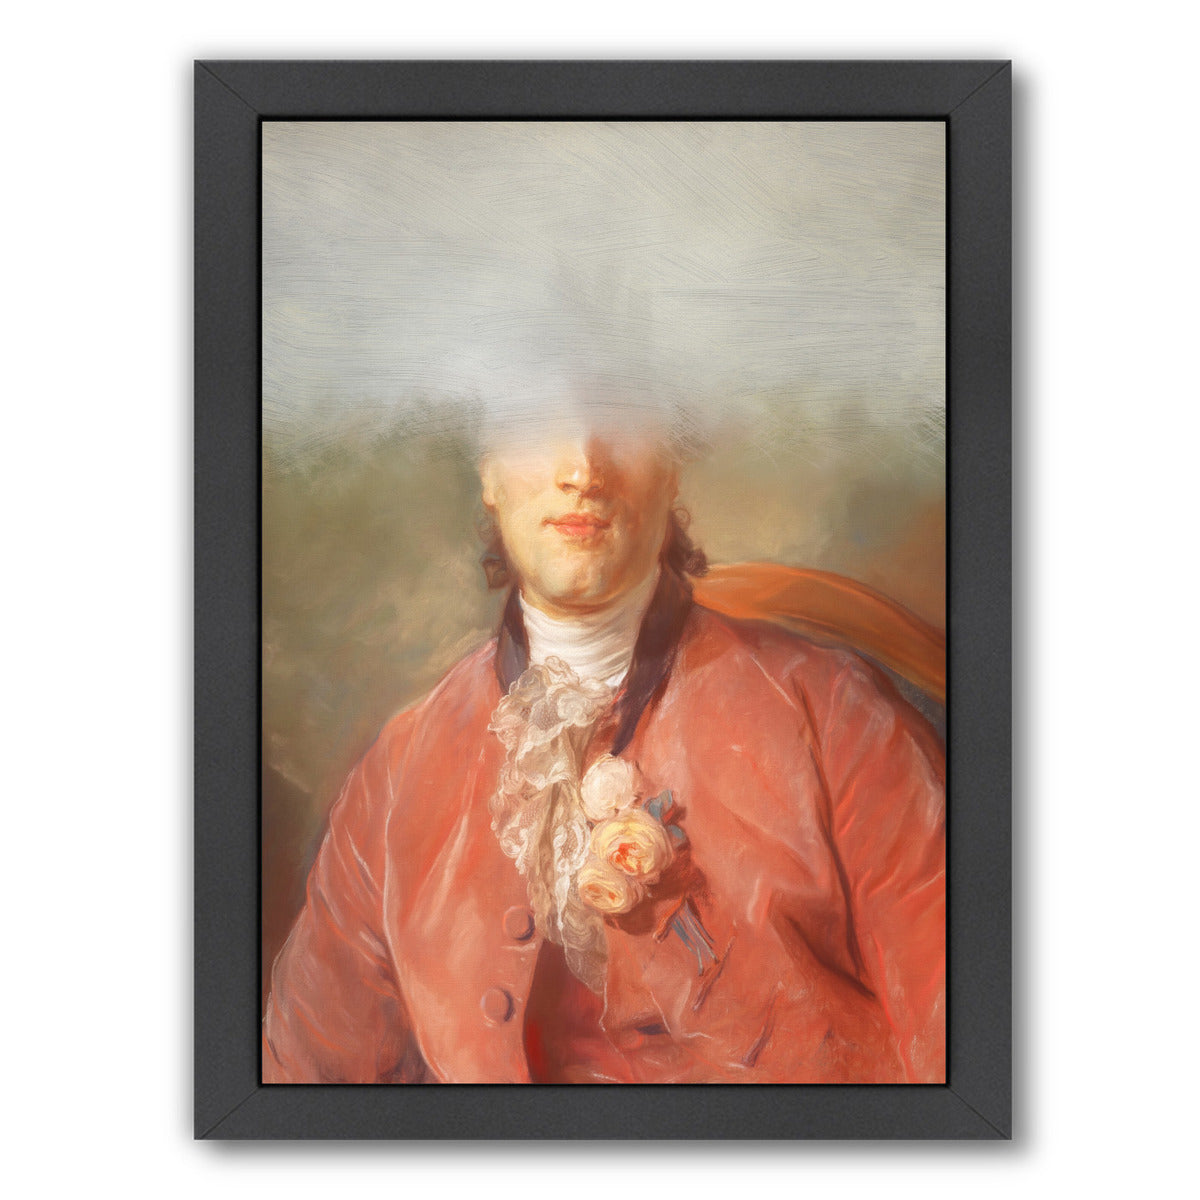 The Frenchman By Chaos & Wonder Design - Black Framed Print - Wall Art - Americanflat